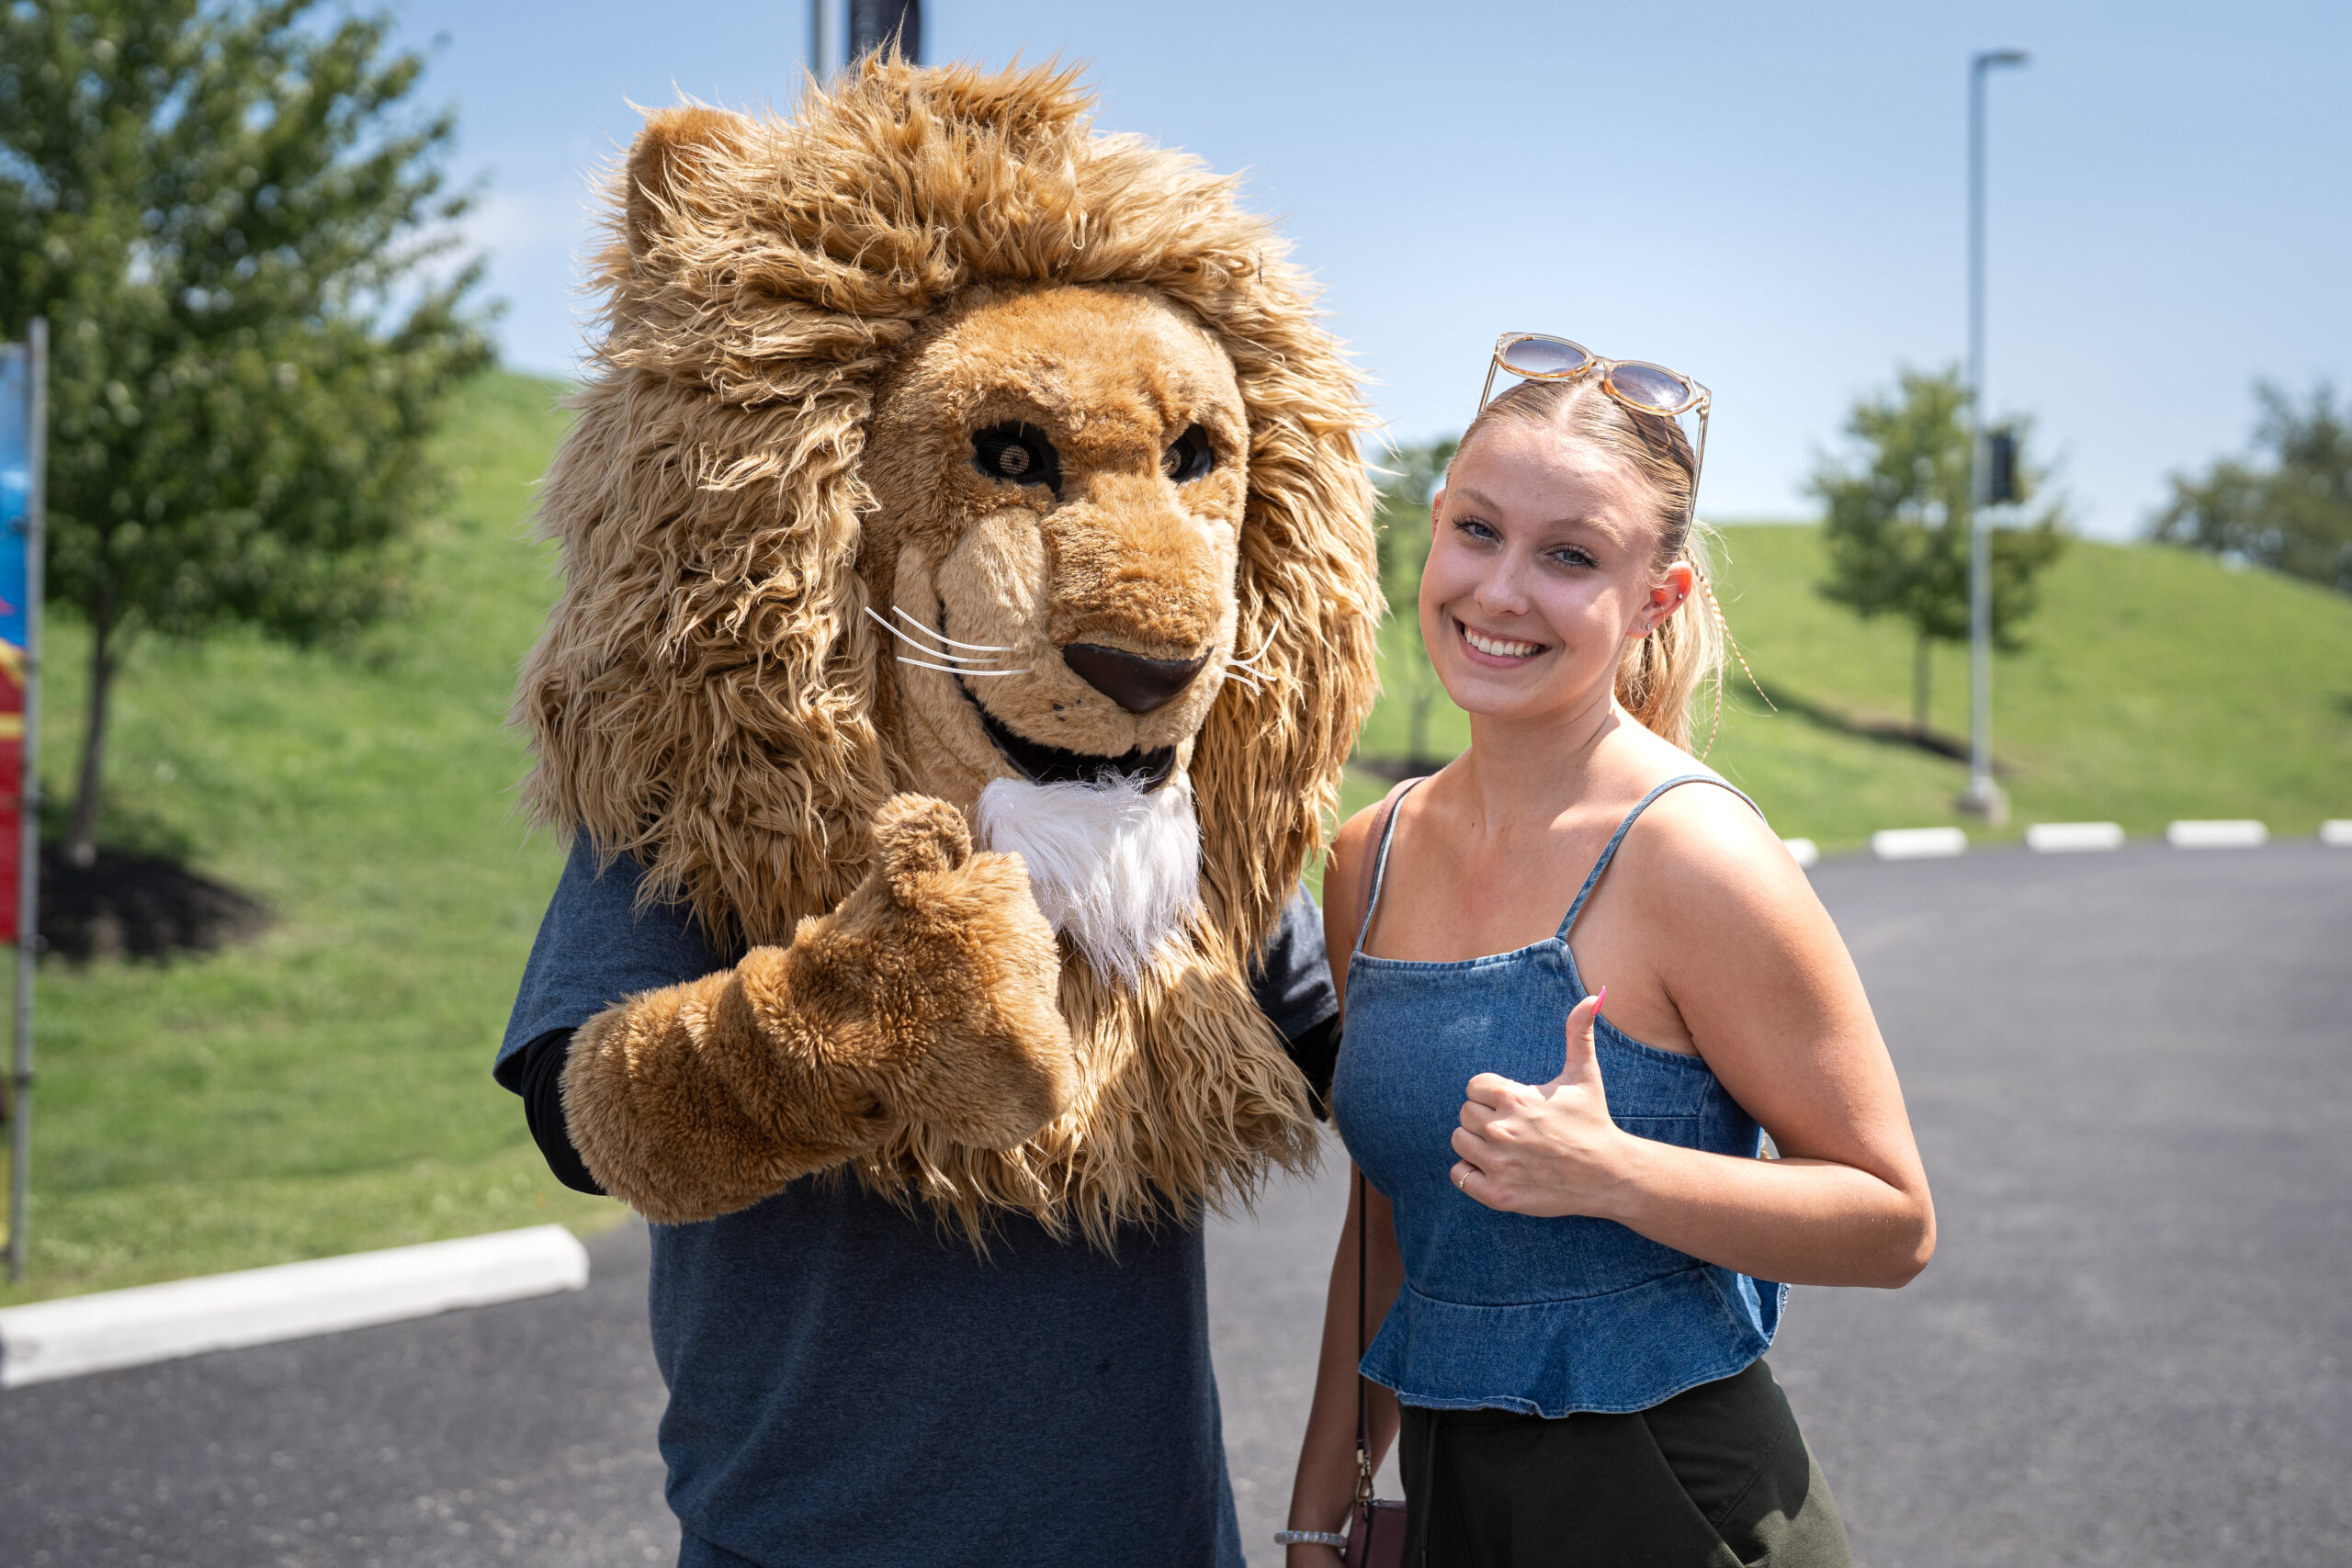 A student is pictured giving a thumbs up with a lion mascot character.